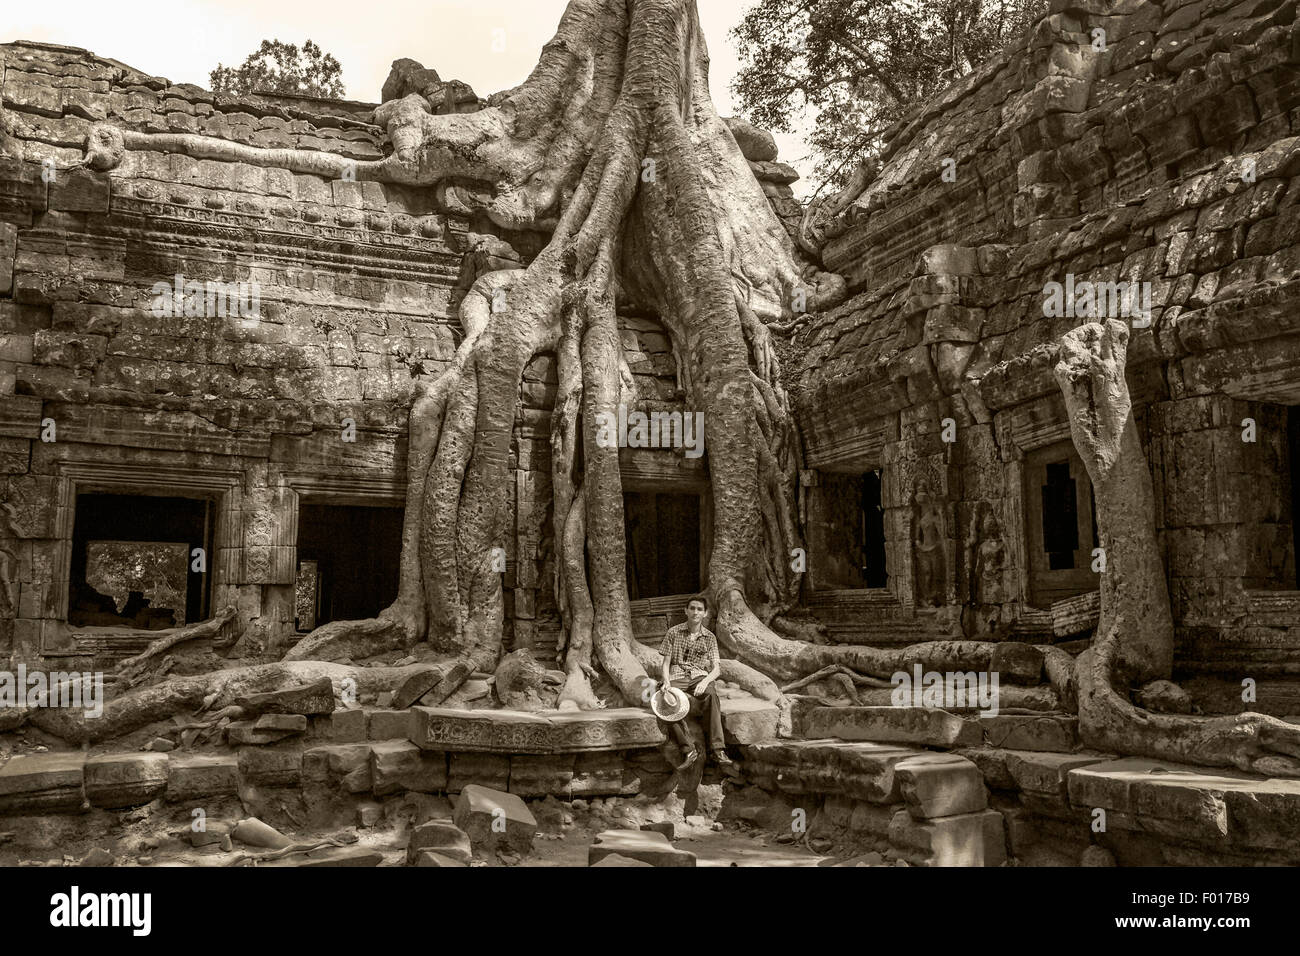 Strangler fig over growing temple in Ta Prohm Temple, Cambodia Stock Photo